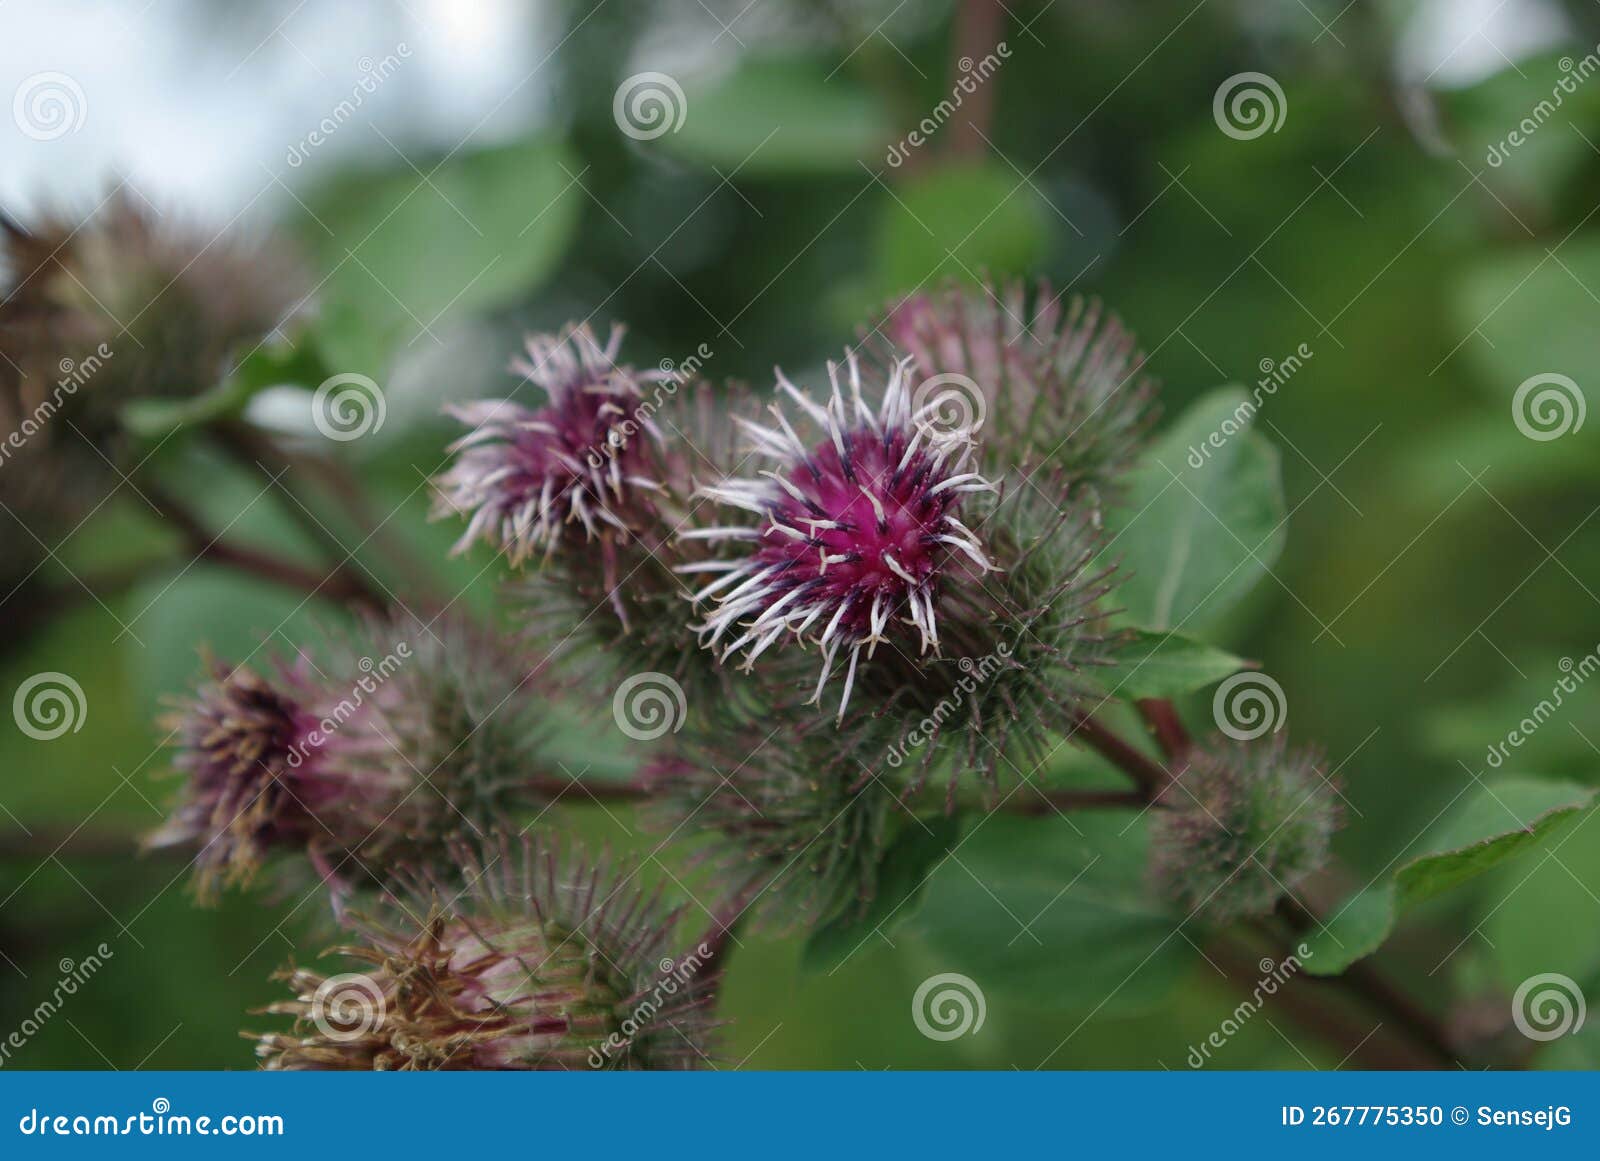 velcro Plant Bushes - a Royalty Free Stock Photo from Photocase